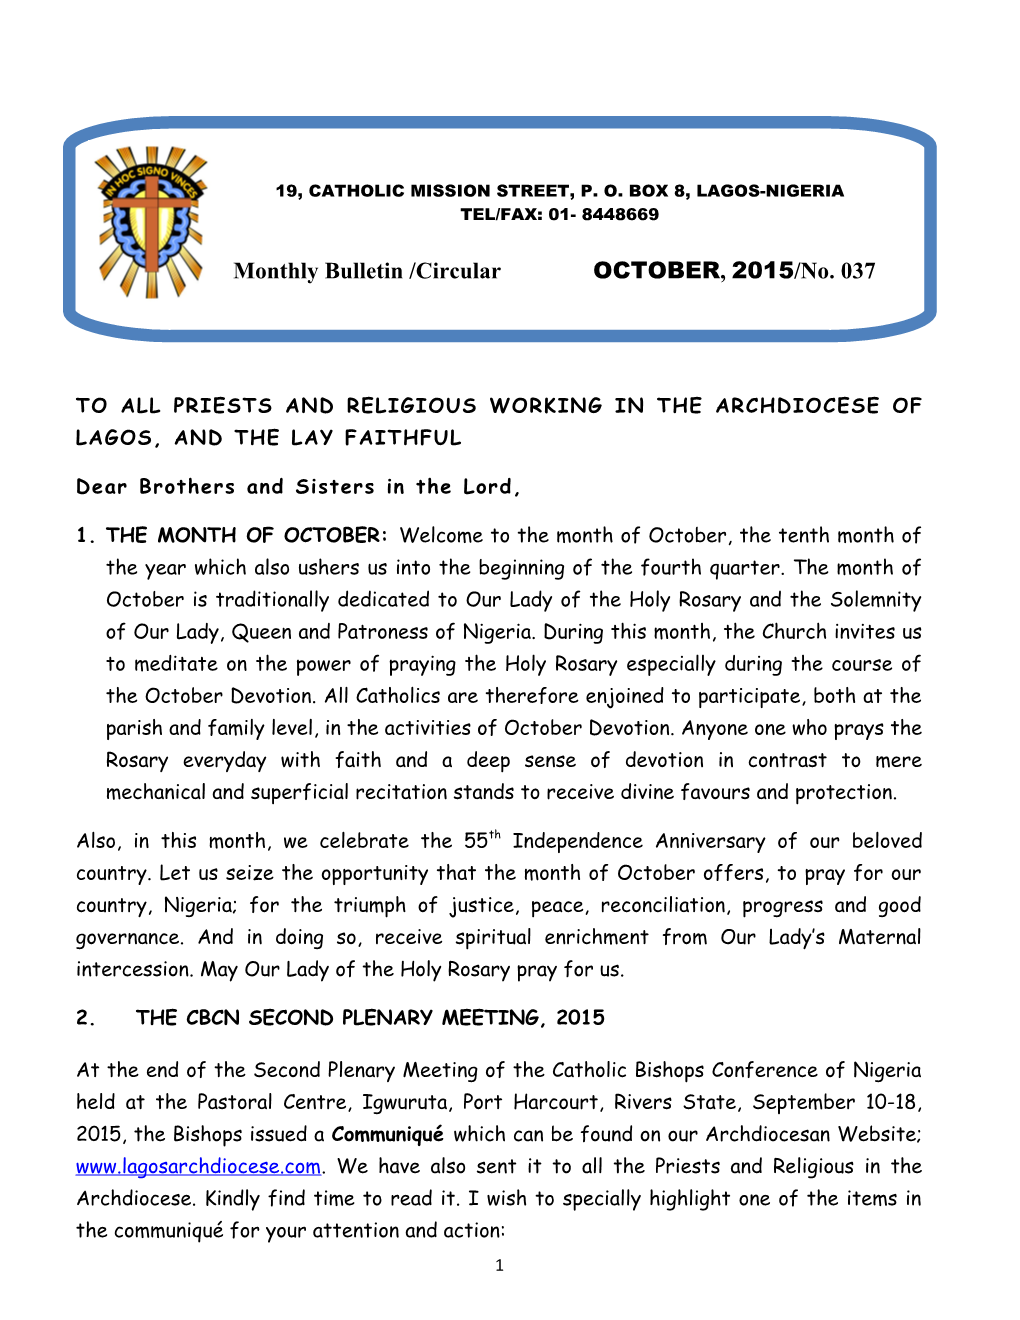 To All Priests and Religious Working in the Archdiocese of Lagos, and the Lay Faithful